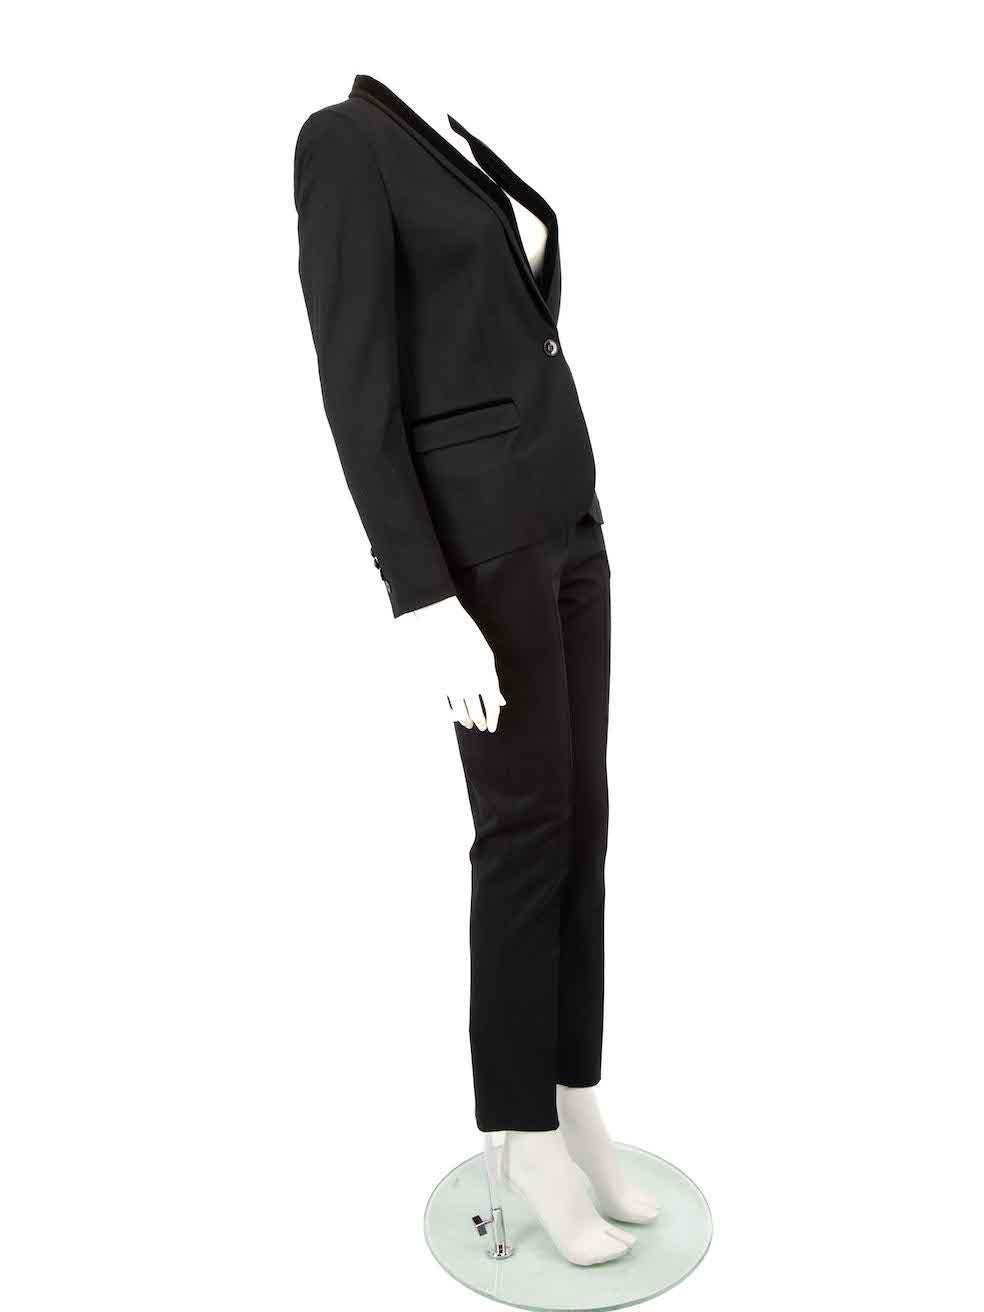 CONDITION is Very good. Hardly any visible wear to suit set is evident on this used The Kooples designer resale item.
 
 
 
 Details
 
 
 Black
 
 Wool
 
 Suit set
 
 Button up blazer
 
 Velvet trim
 
 Silver chain detail
 
 3x Front pockets
 
